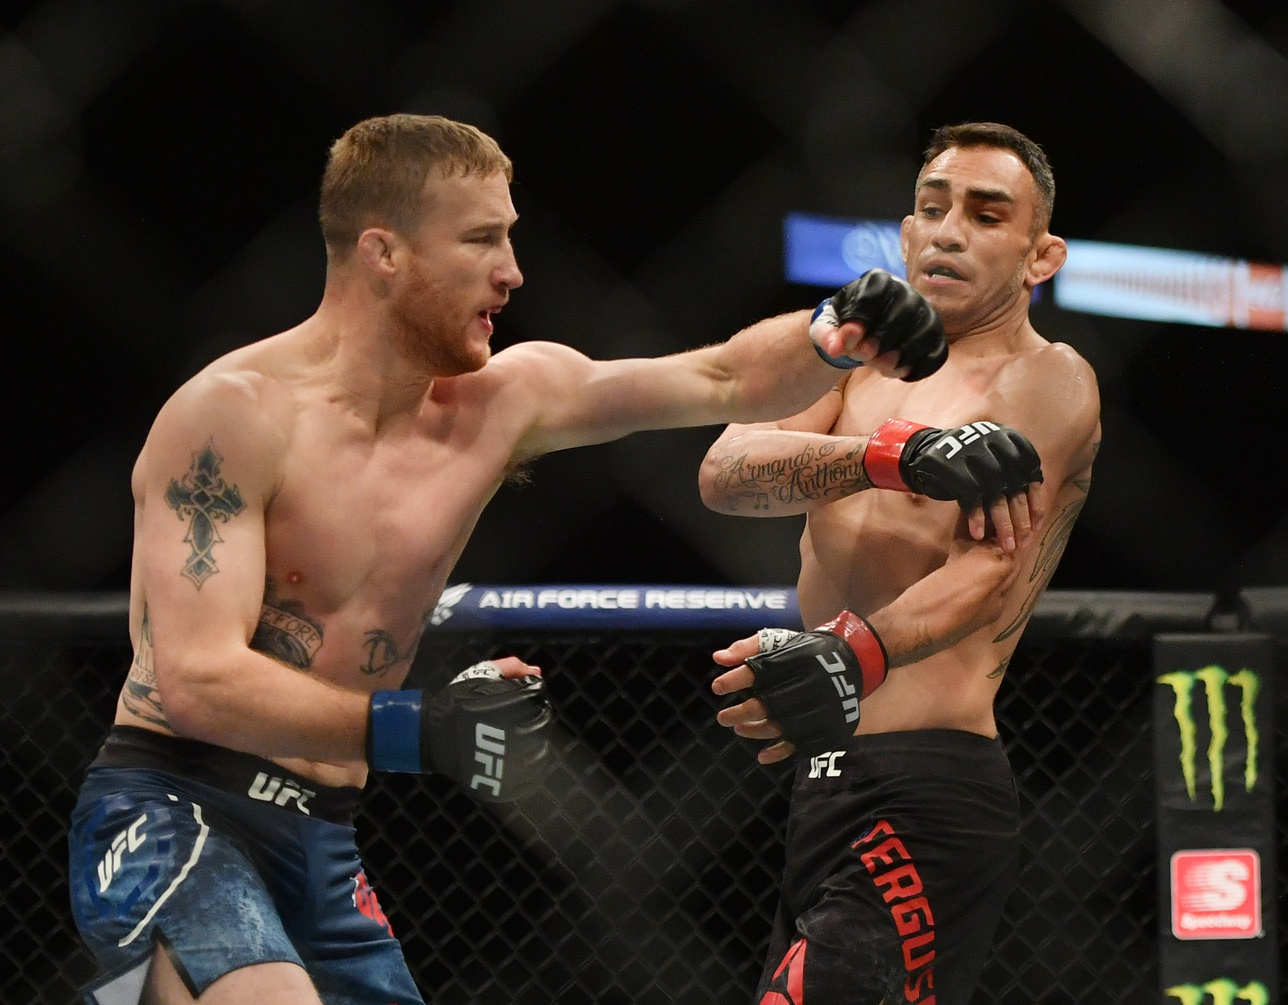 Twitter reacts to Justin Gaethje dominating Tony Ferguson in UFC 249